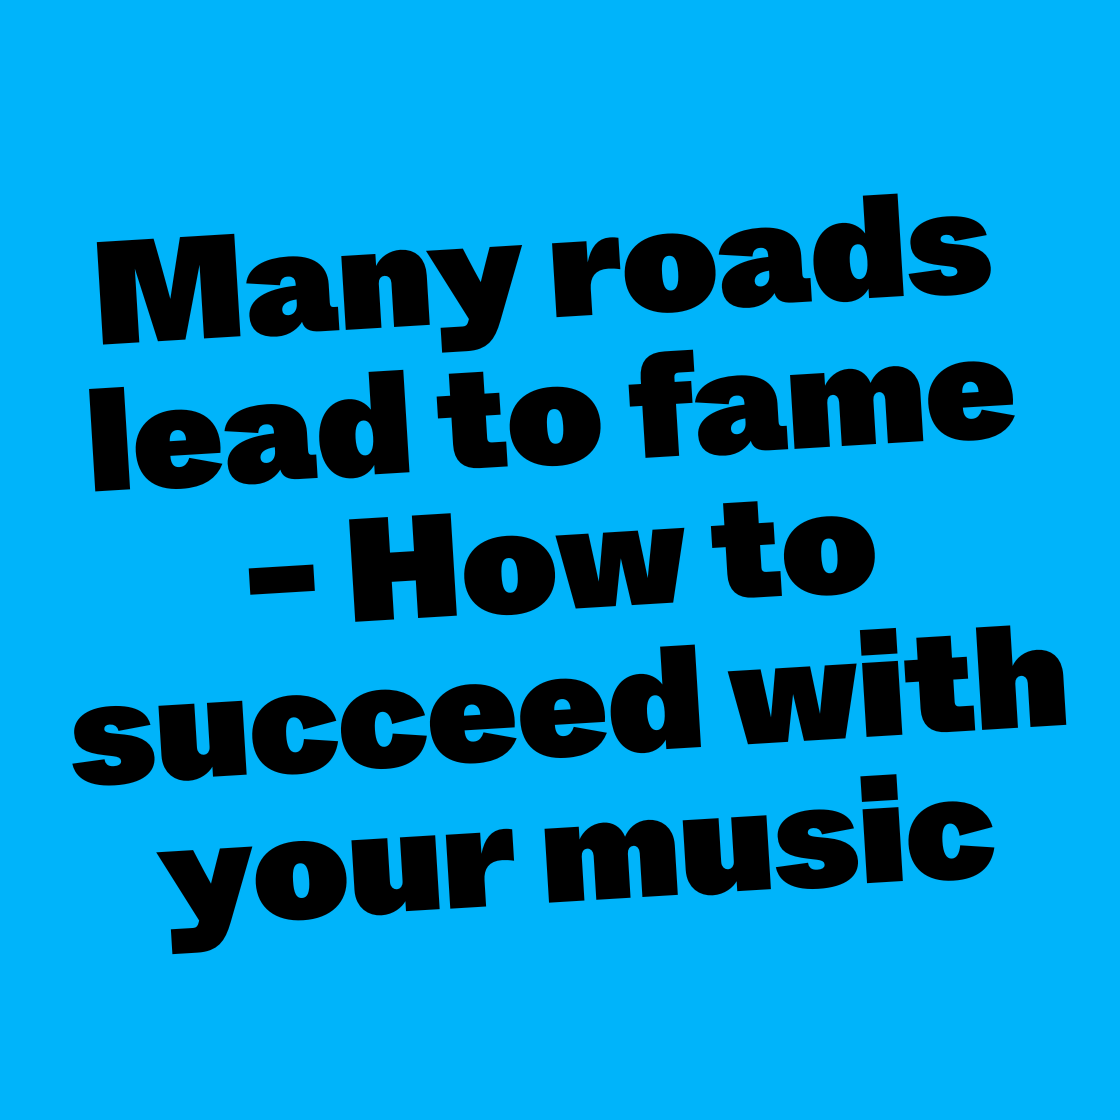 Many roads lead to fame